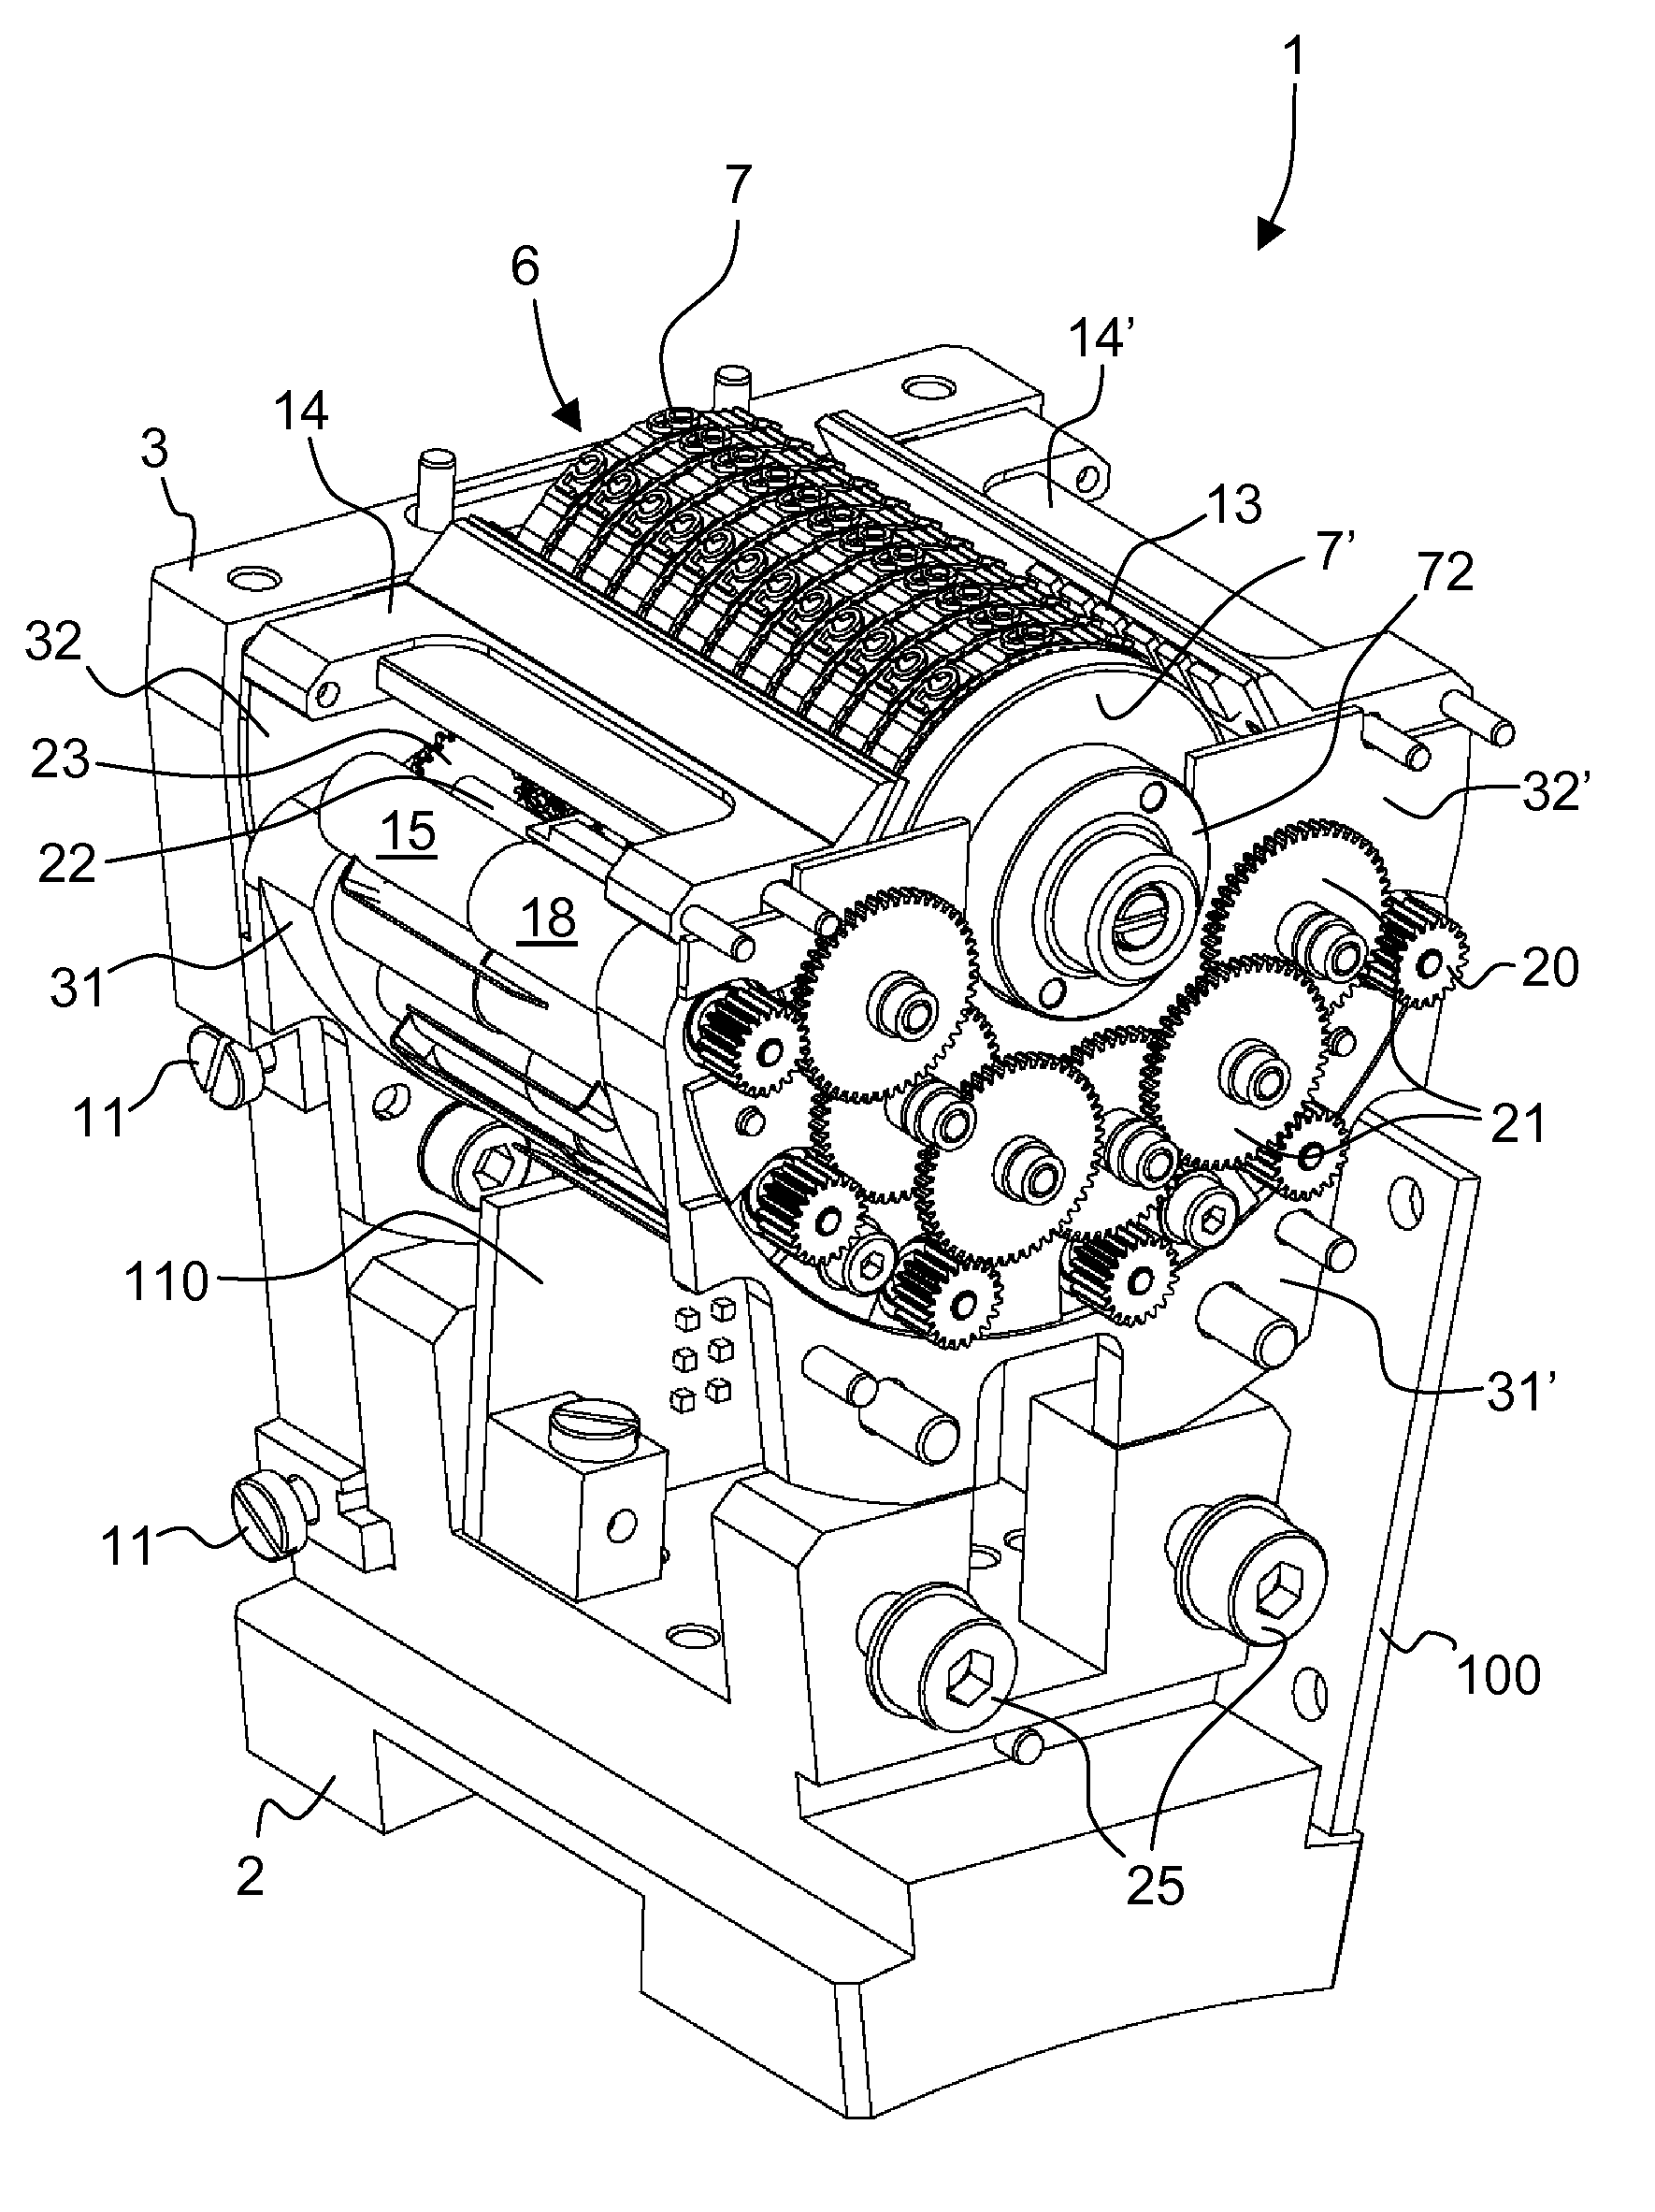 Numbering device for typographic numbering